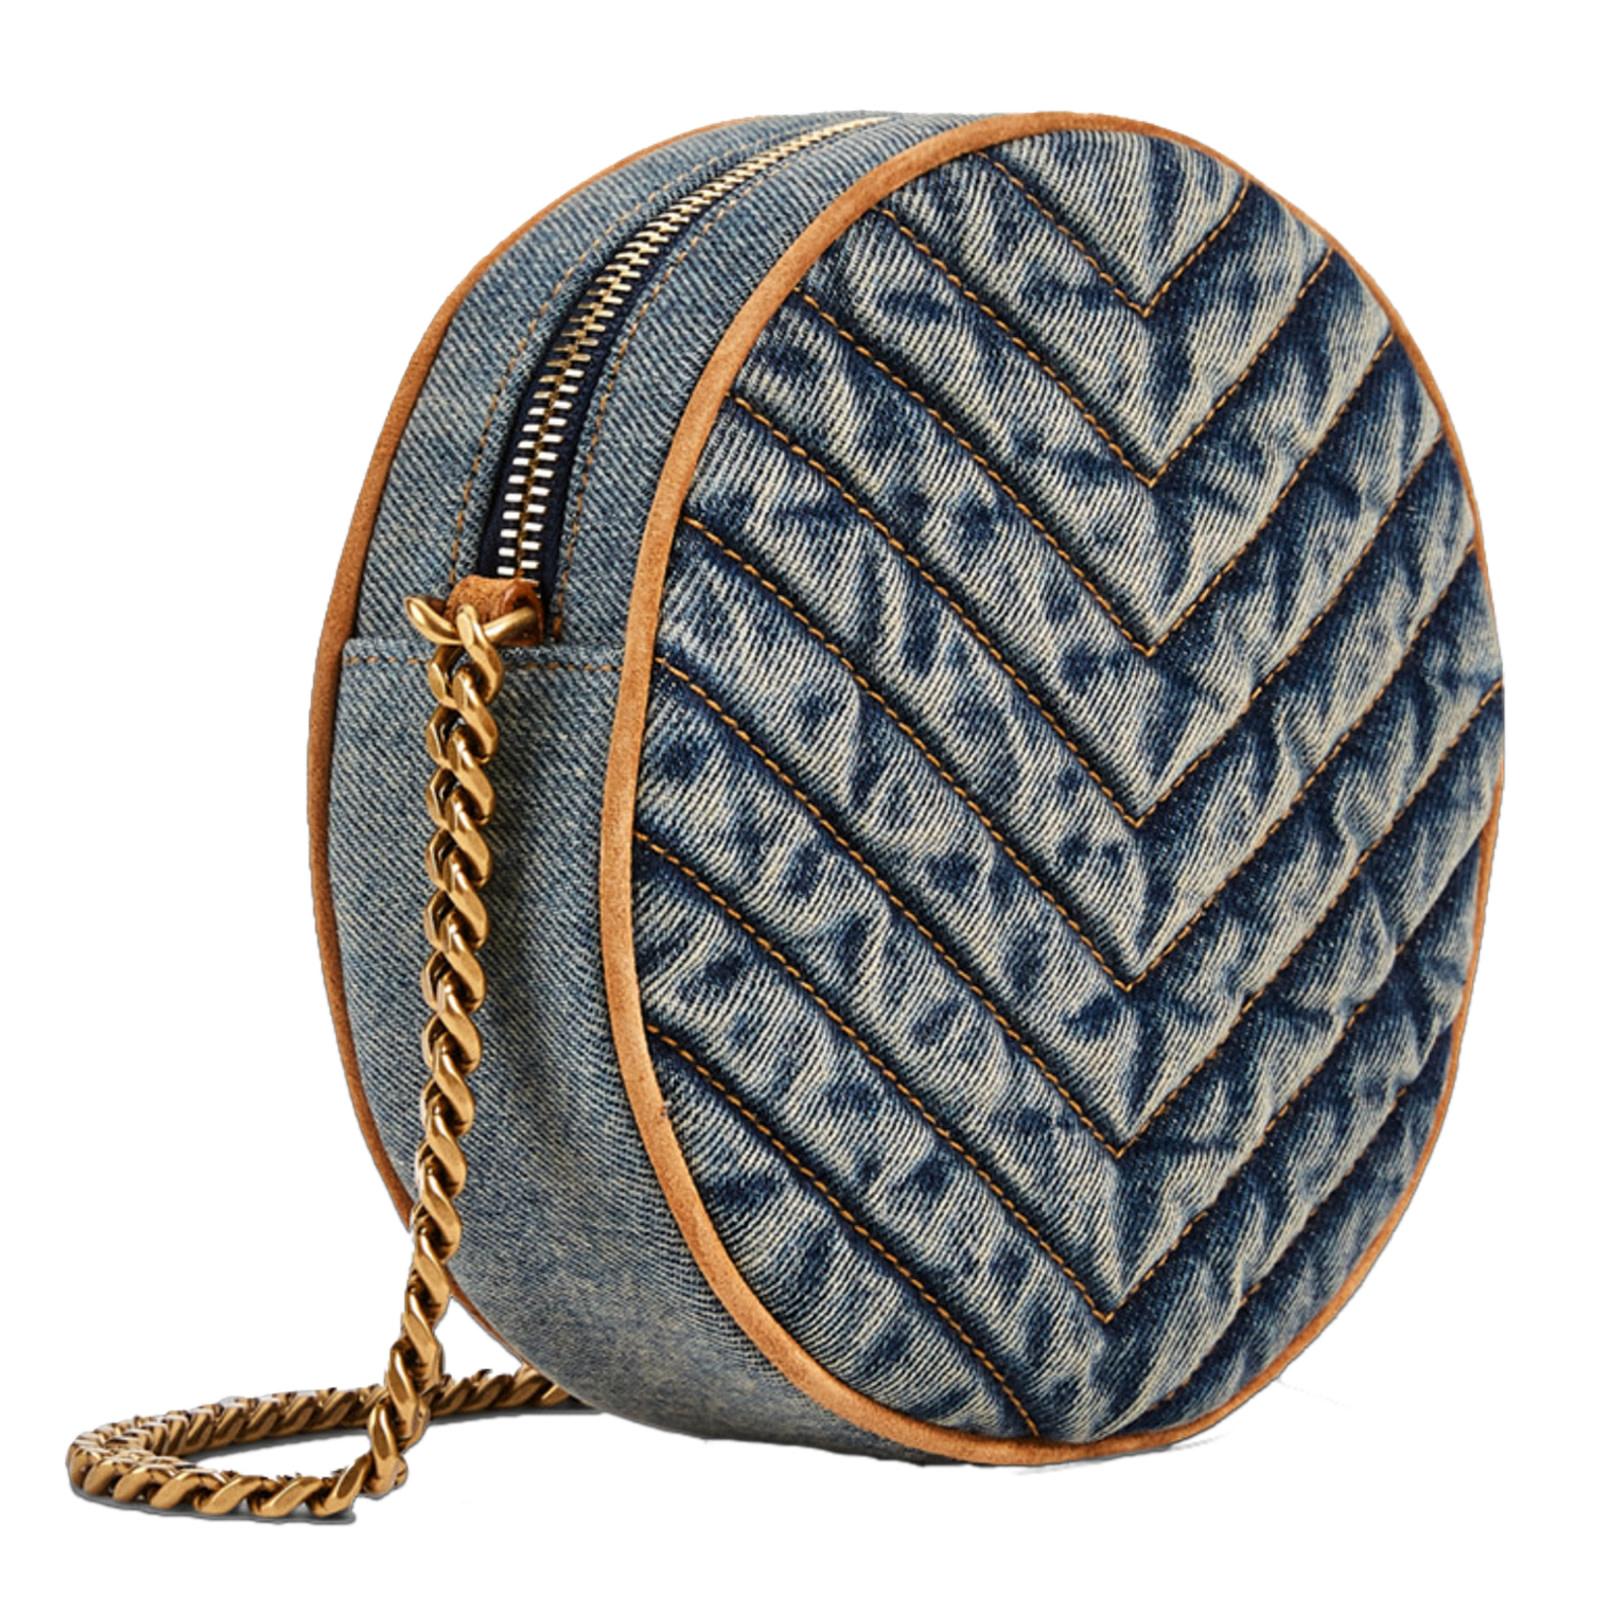 This round shoulder bag is made in Italy from quilted denim with leather and suede finishes. Featuring antiqued gold tone hardware, faded finish, chain shoulder strap with round leather reinforcement, a YSL logo plaque and chevron matelassé